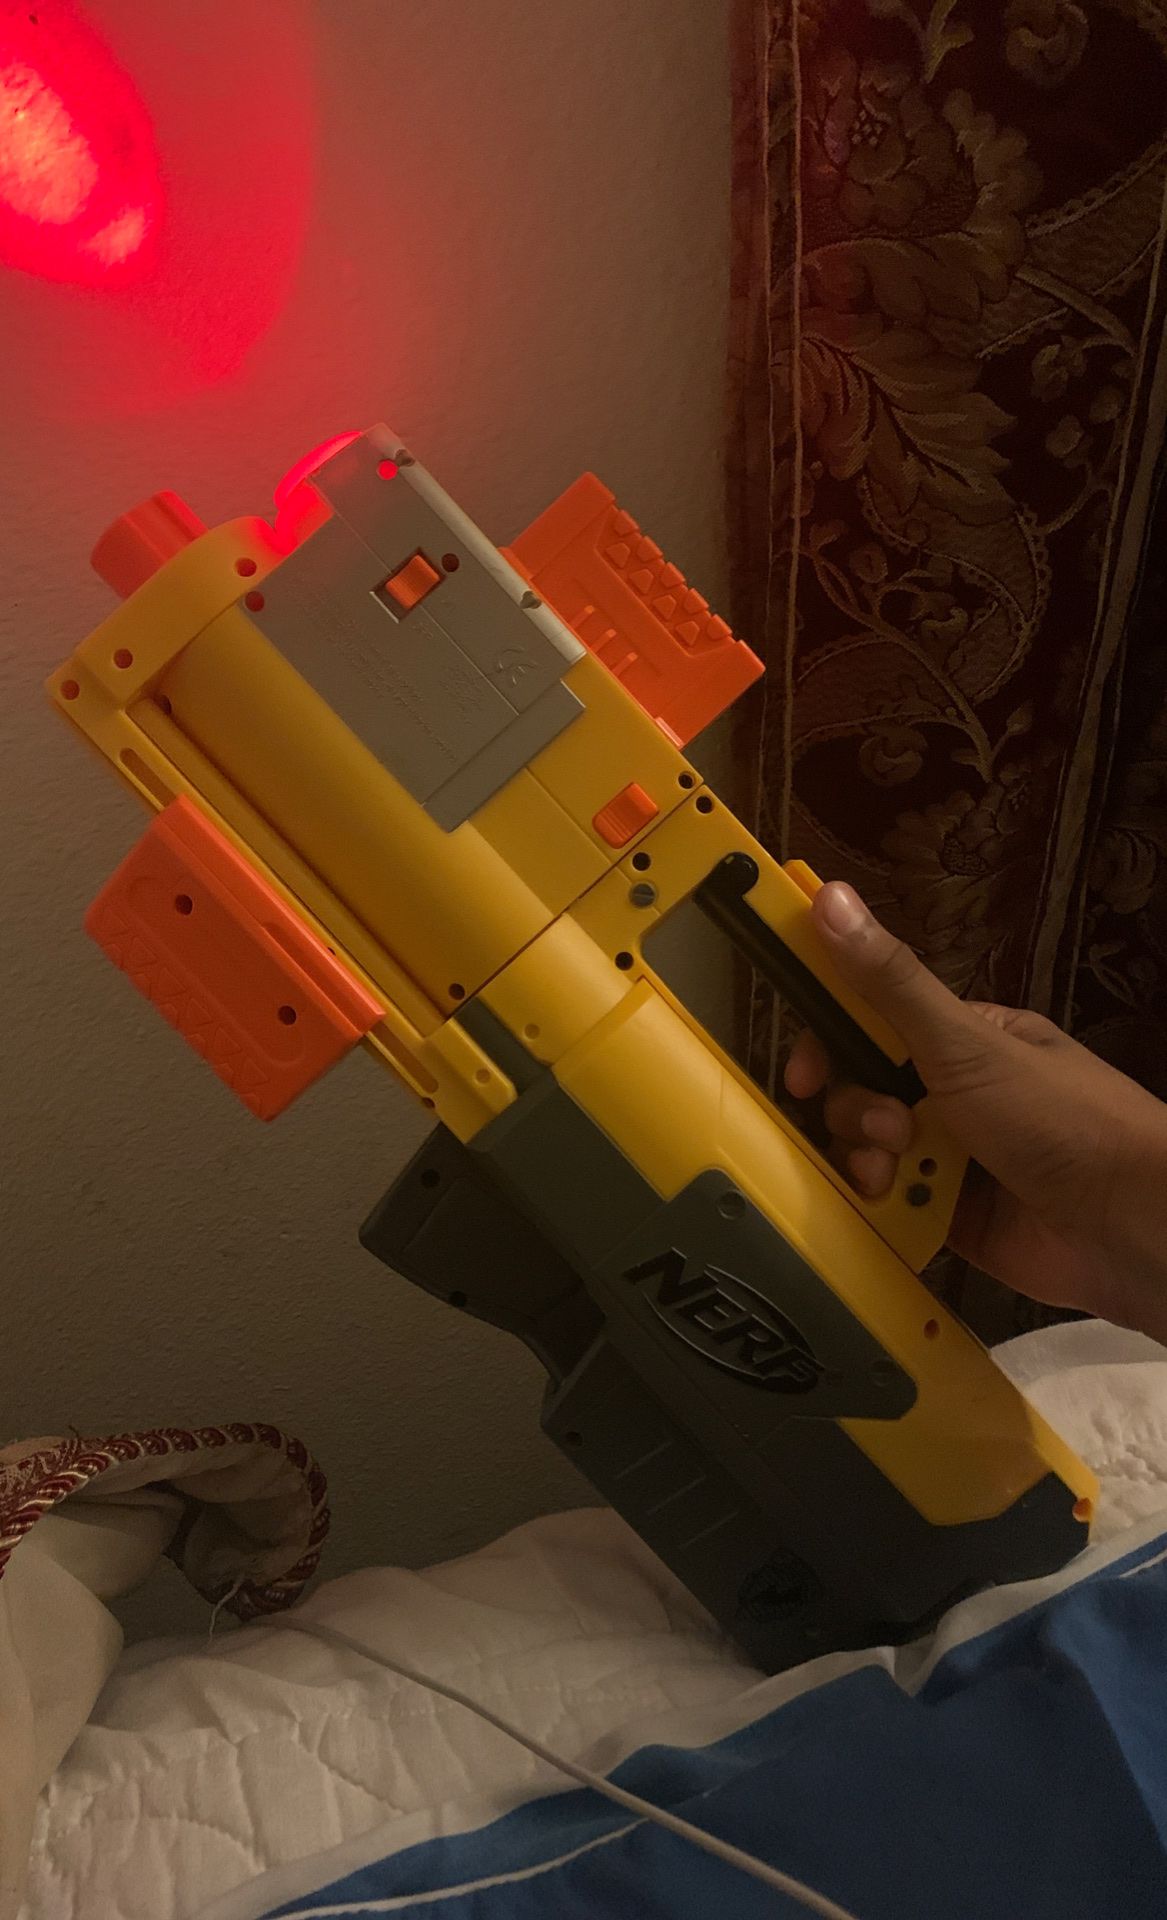 Nerf gun foldable with a light and cartridge.